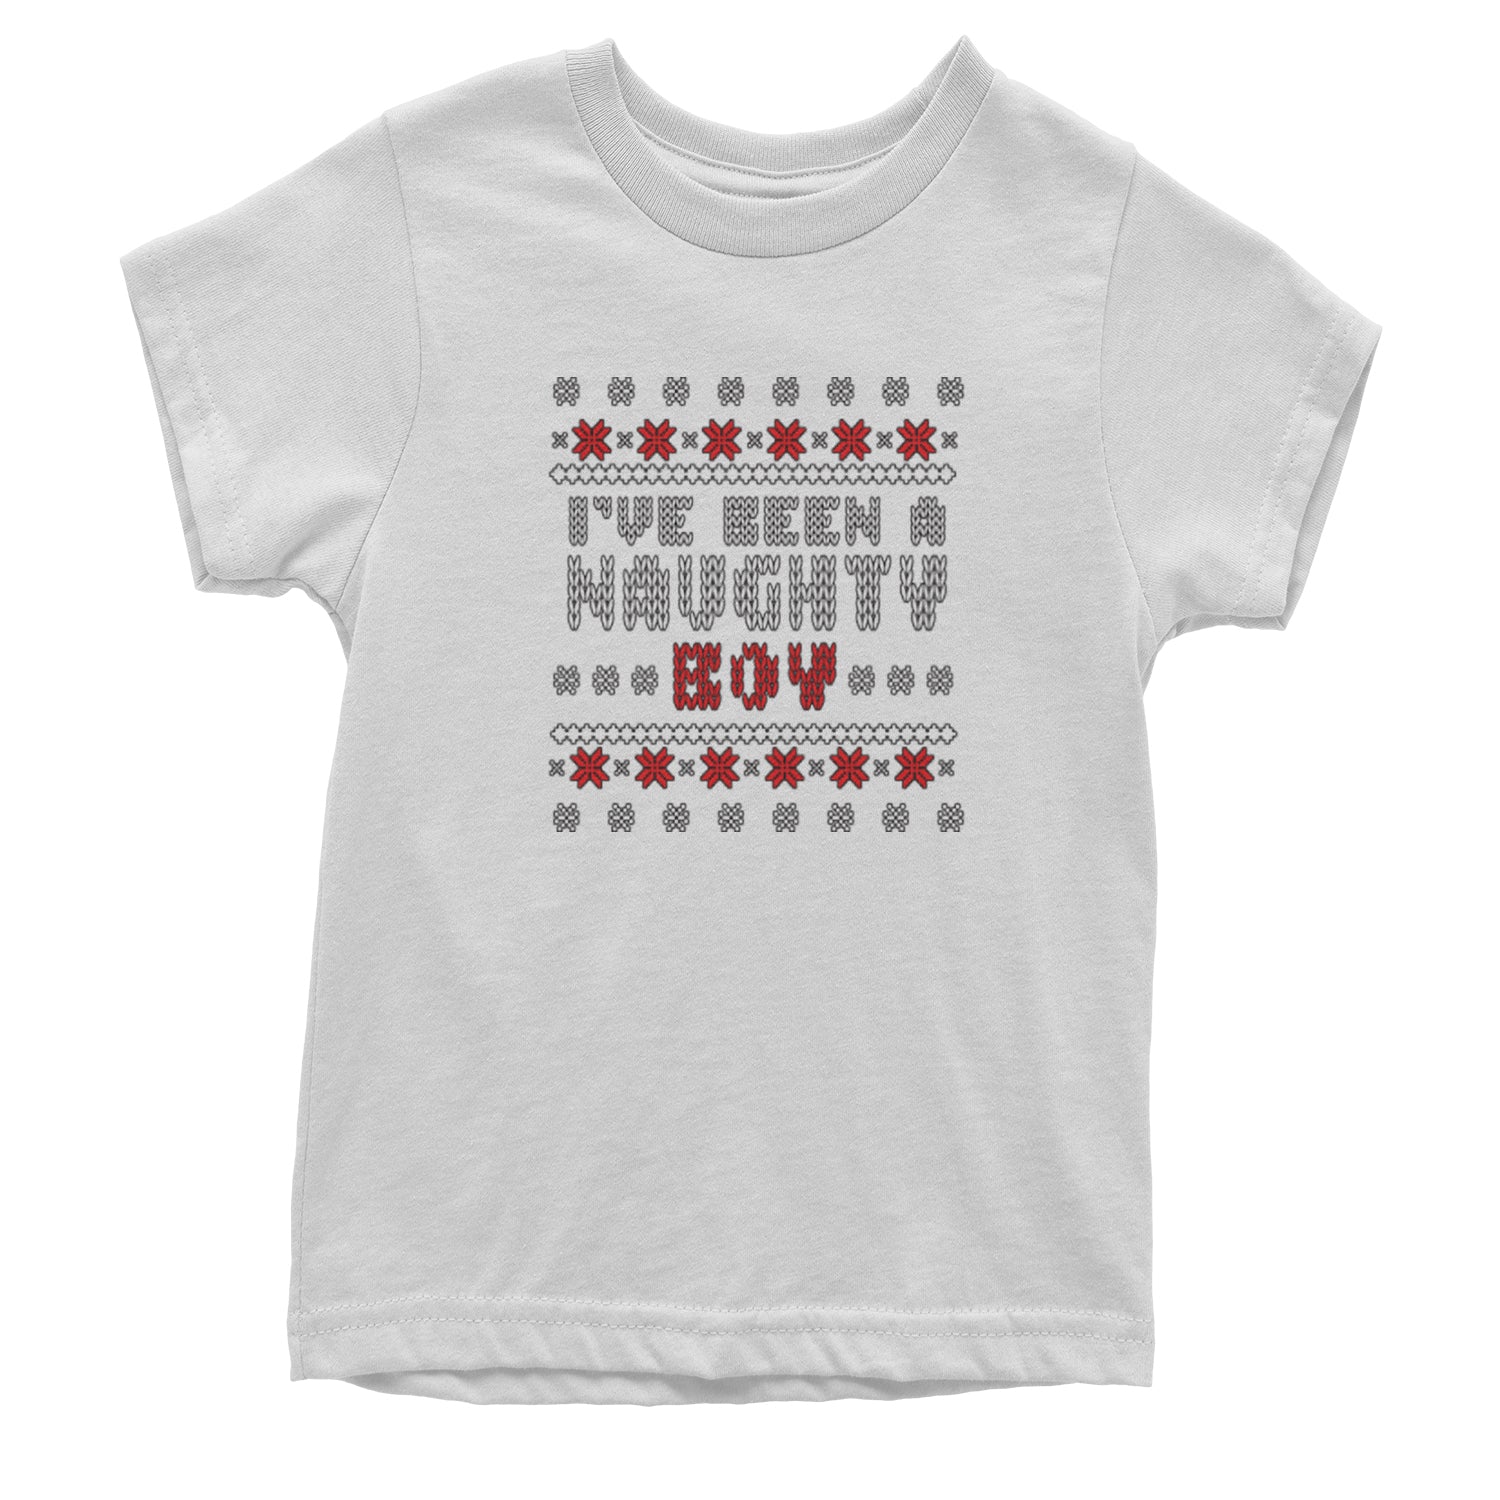 I've Been A Naughty Boy Ugly Christmas Youth T-shirt list, naughty, nice, santa, ugly, xmas by Expression Tees